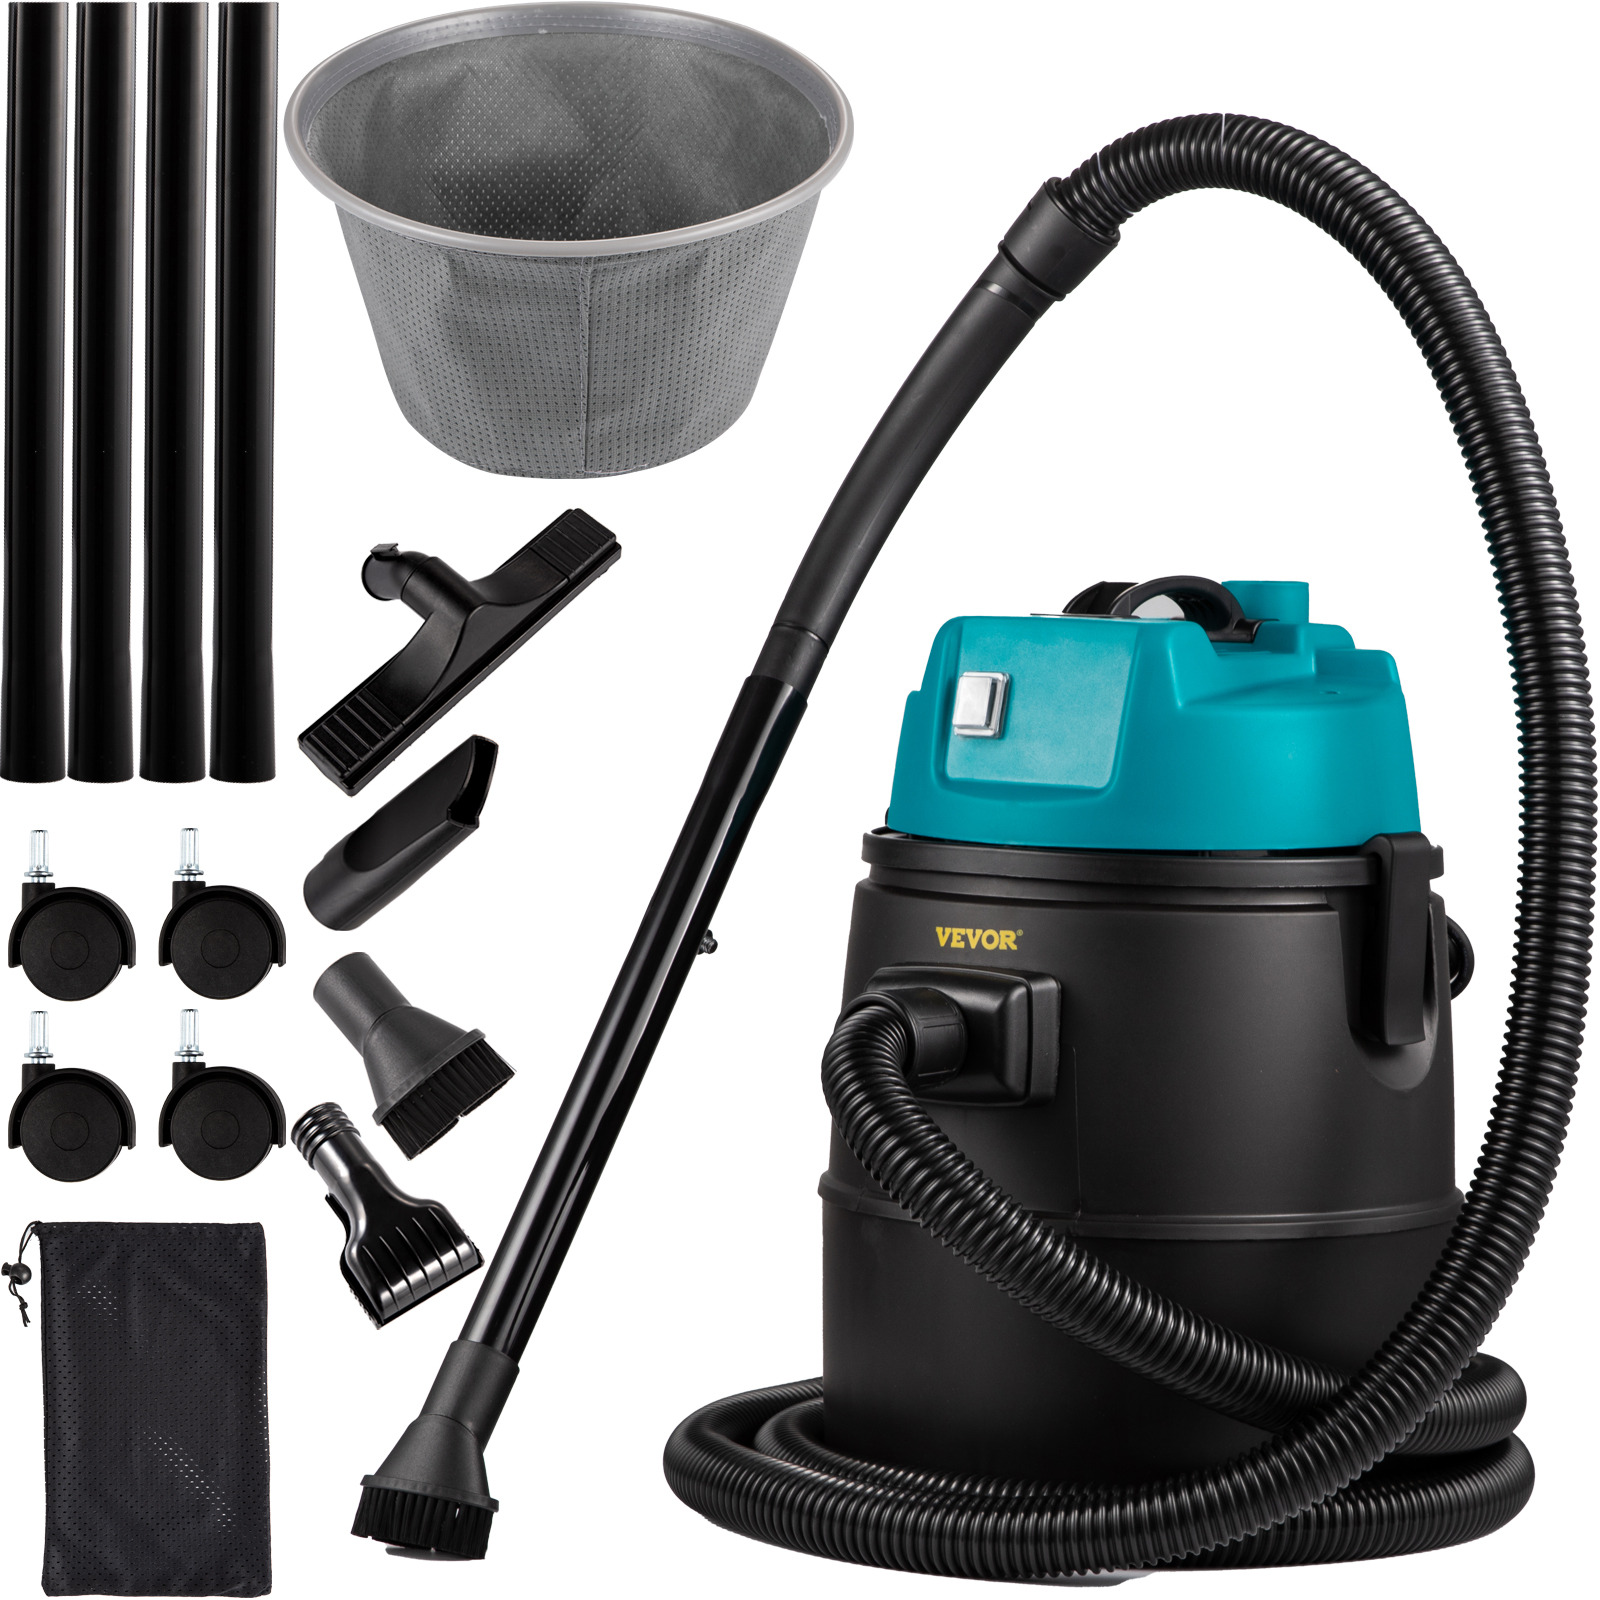 Vevor Pond Vacuum Cleaner, 1400w Motor In Single Chamber Suction System, 120v Mo